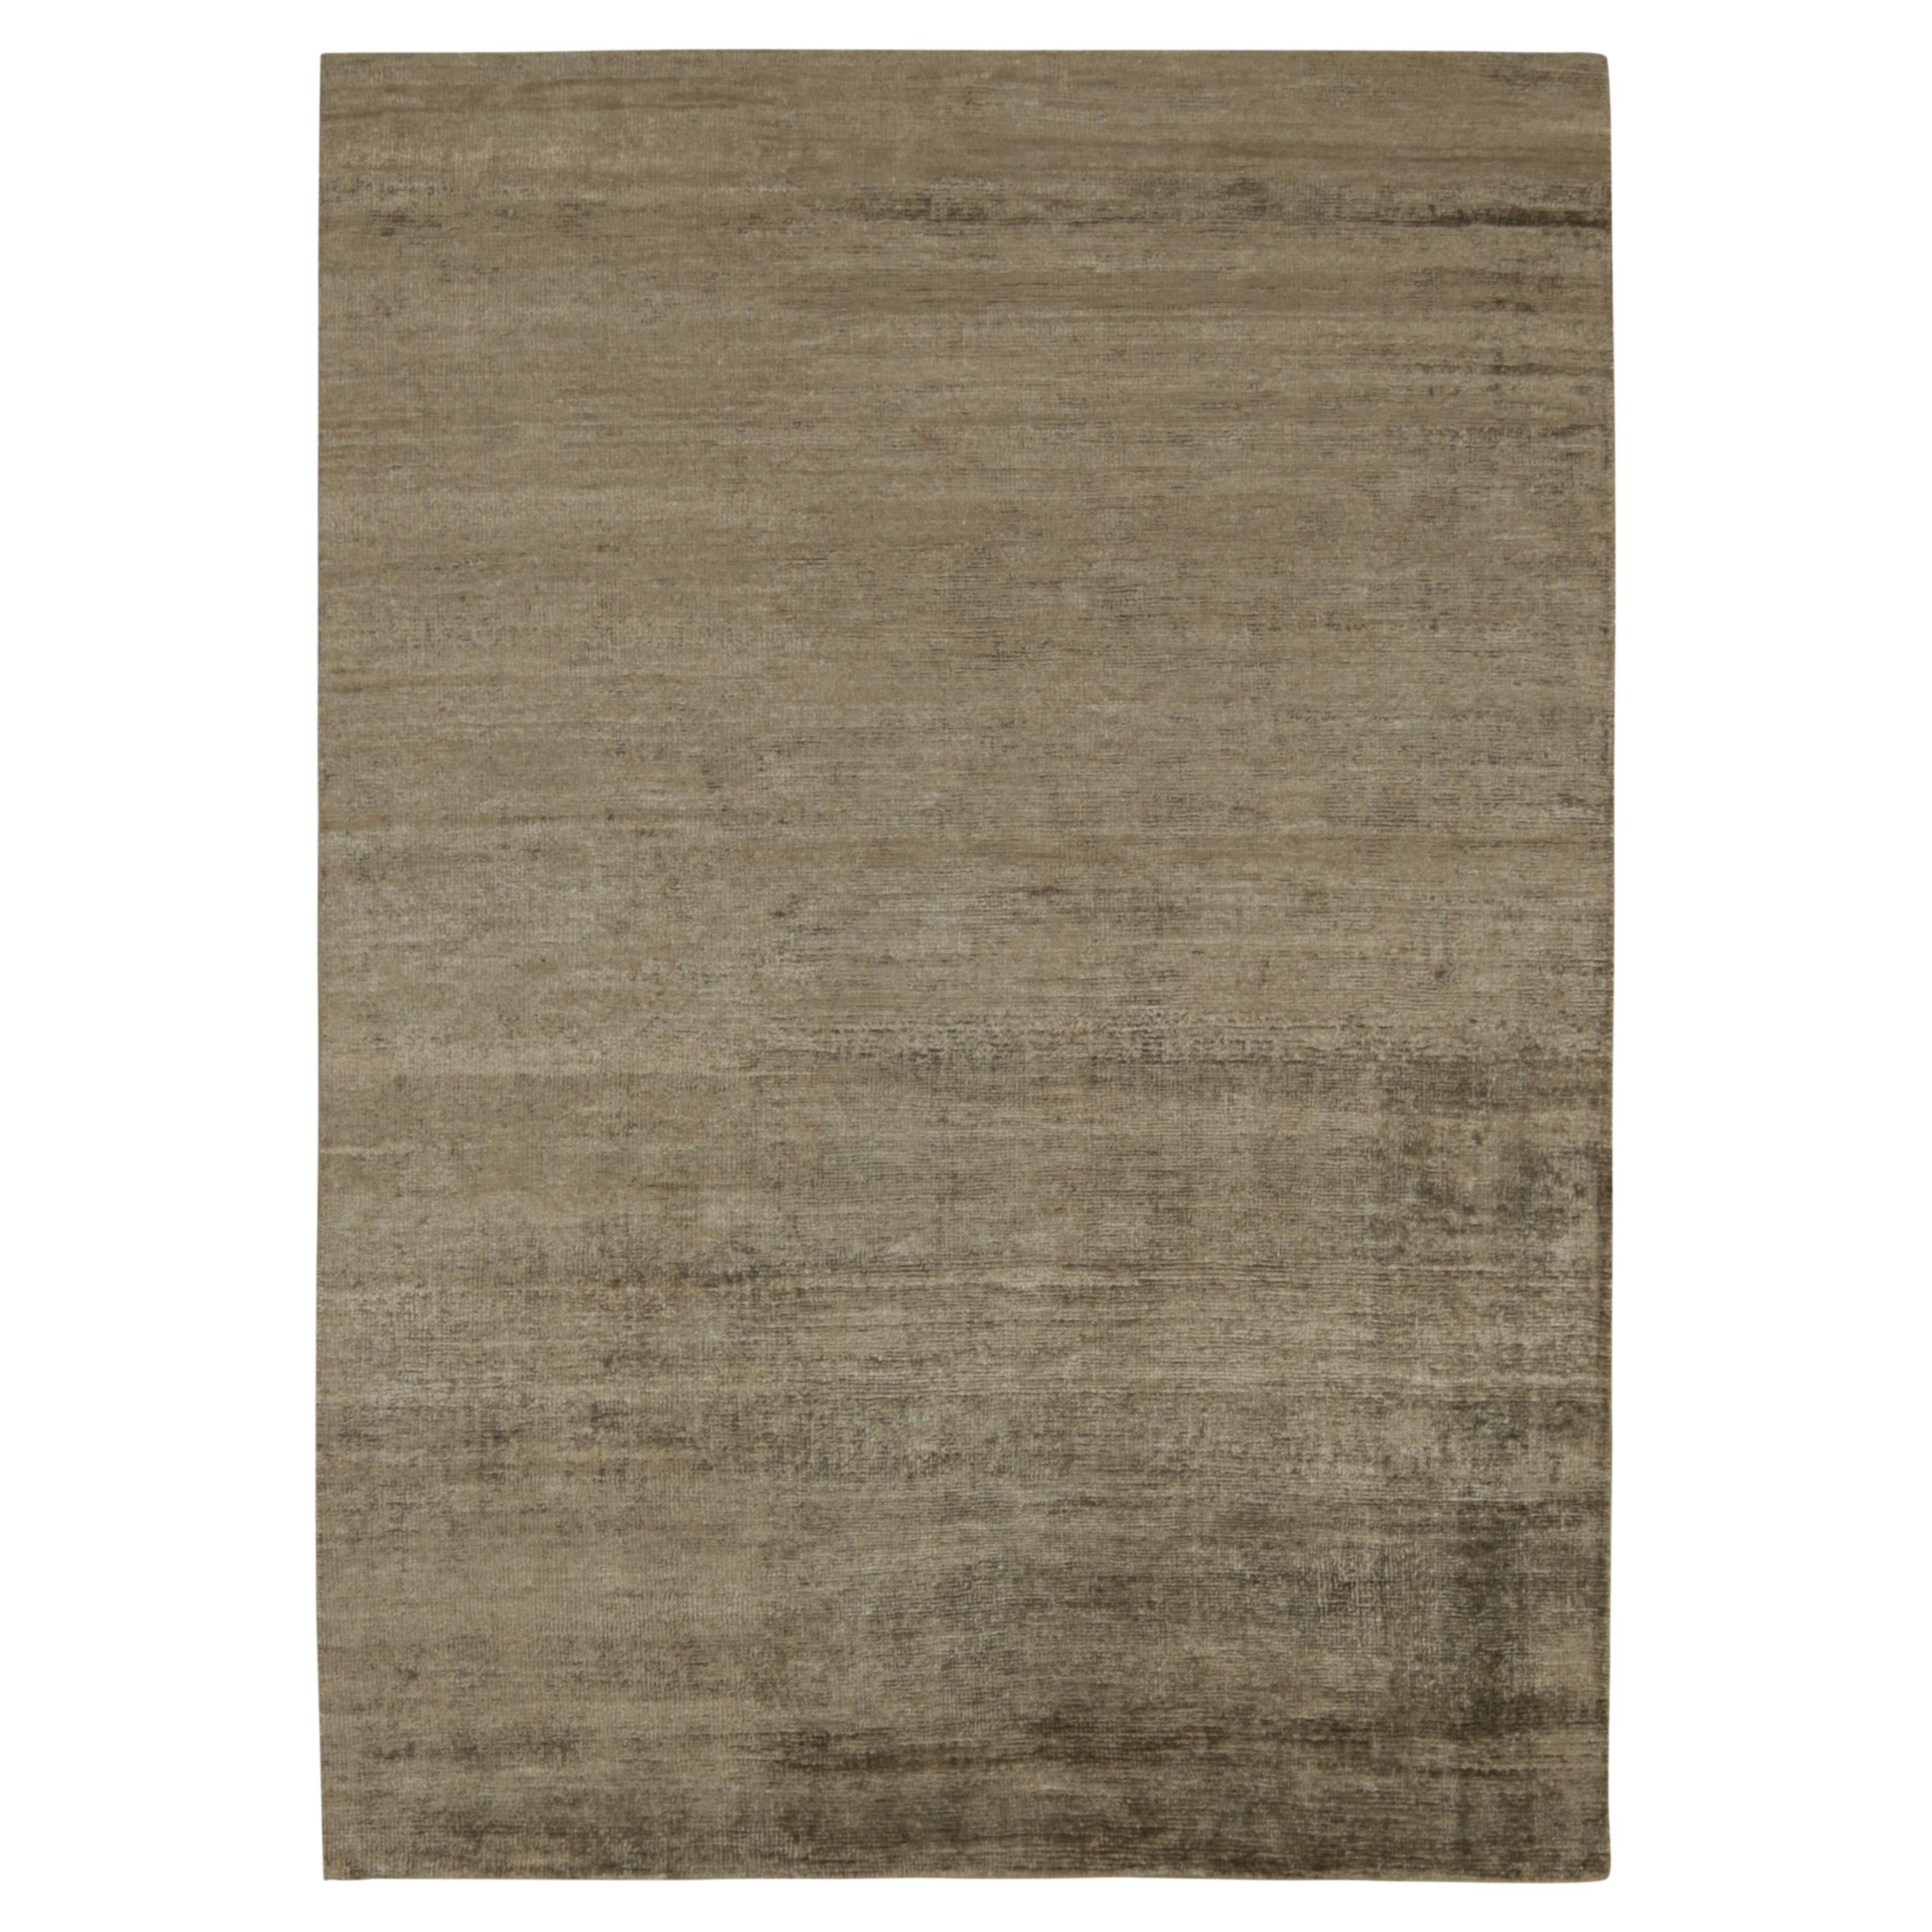 A 5x7 rug in the latest additions to Rug & Kilim’s Texture of Color Collection. Hand-knotted in all-natural silk. 

On the Design: 

This collection connotes an inventive take on plain rugs with a patternless-pattern born of meticulous, striated